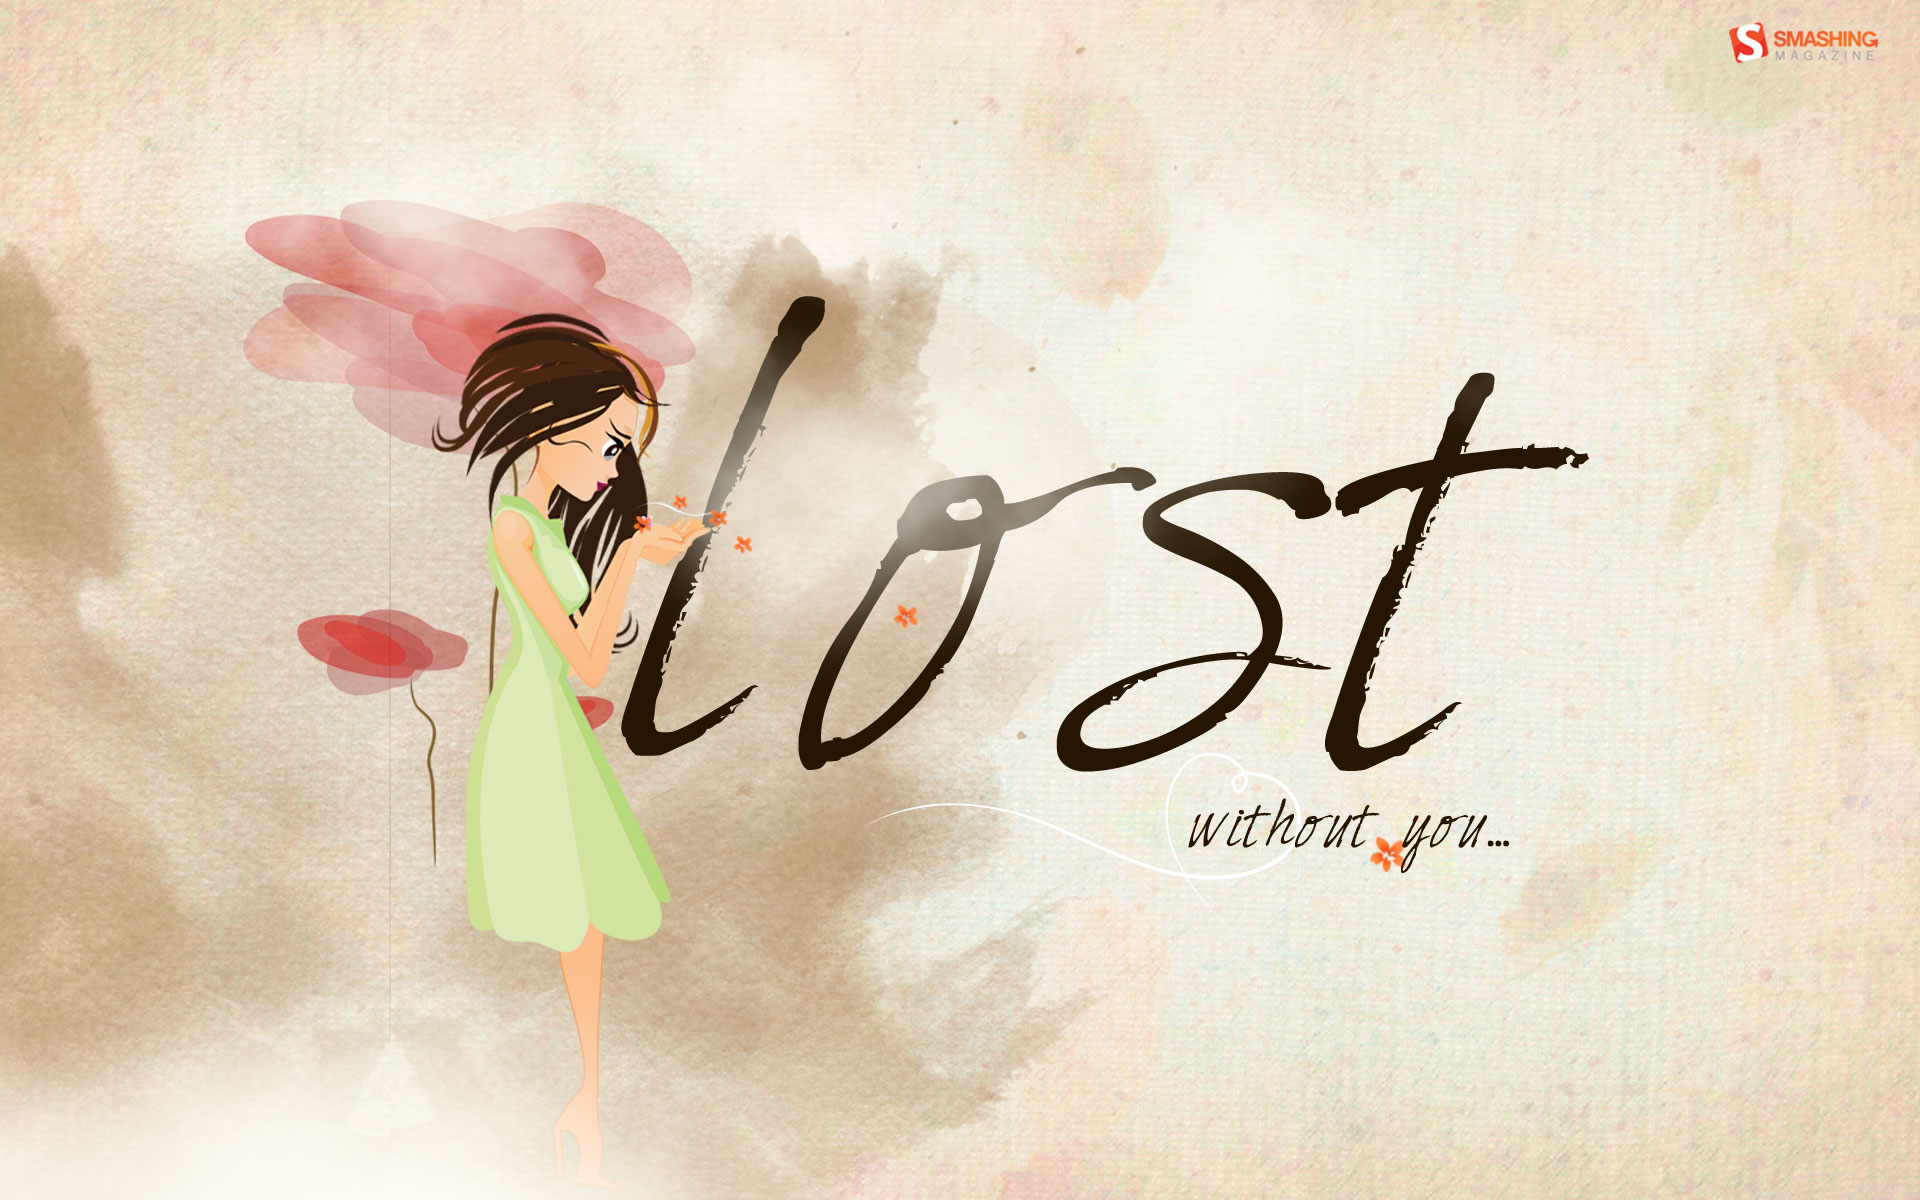 Lost Without You Wallpaper Stock Photos